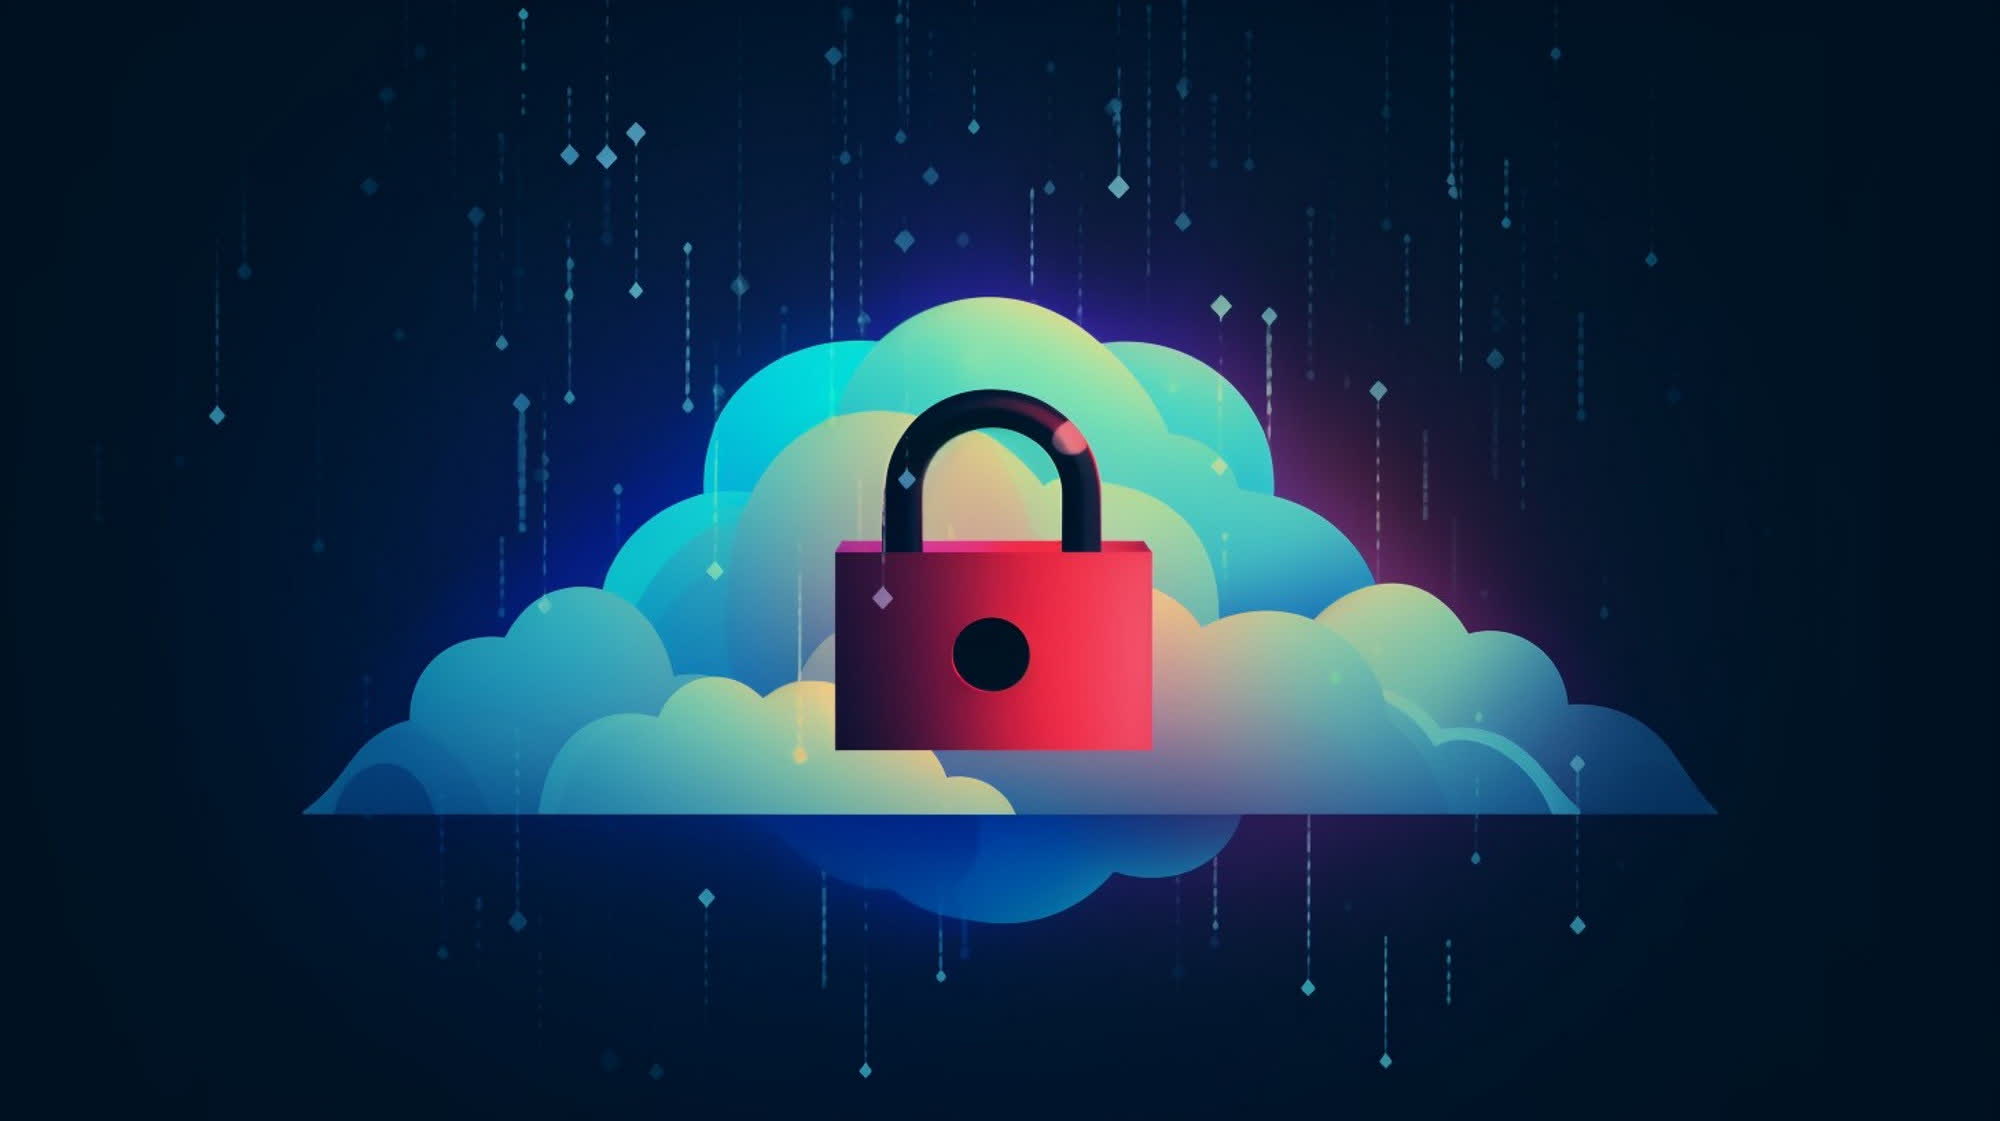 A critical vulnerability in ownCloud servers is being exploited en masse